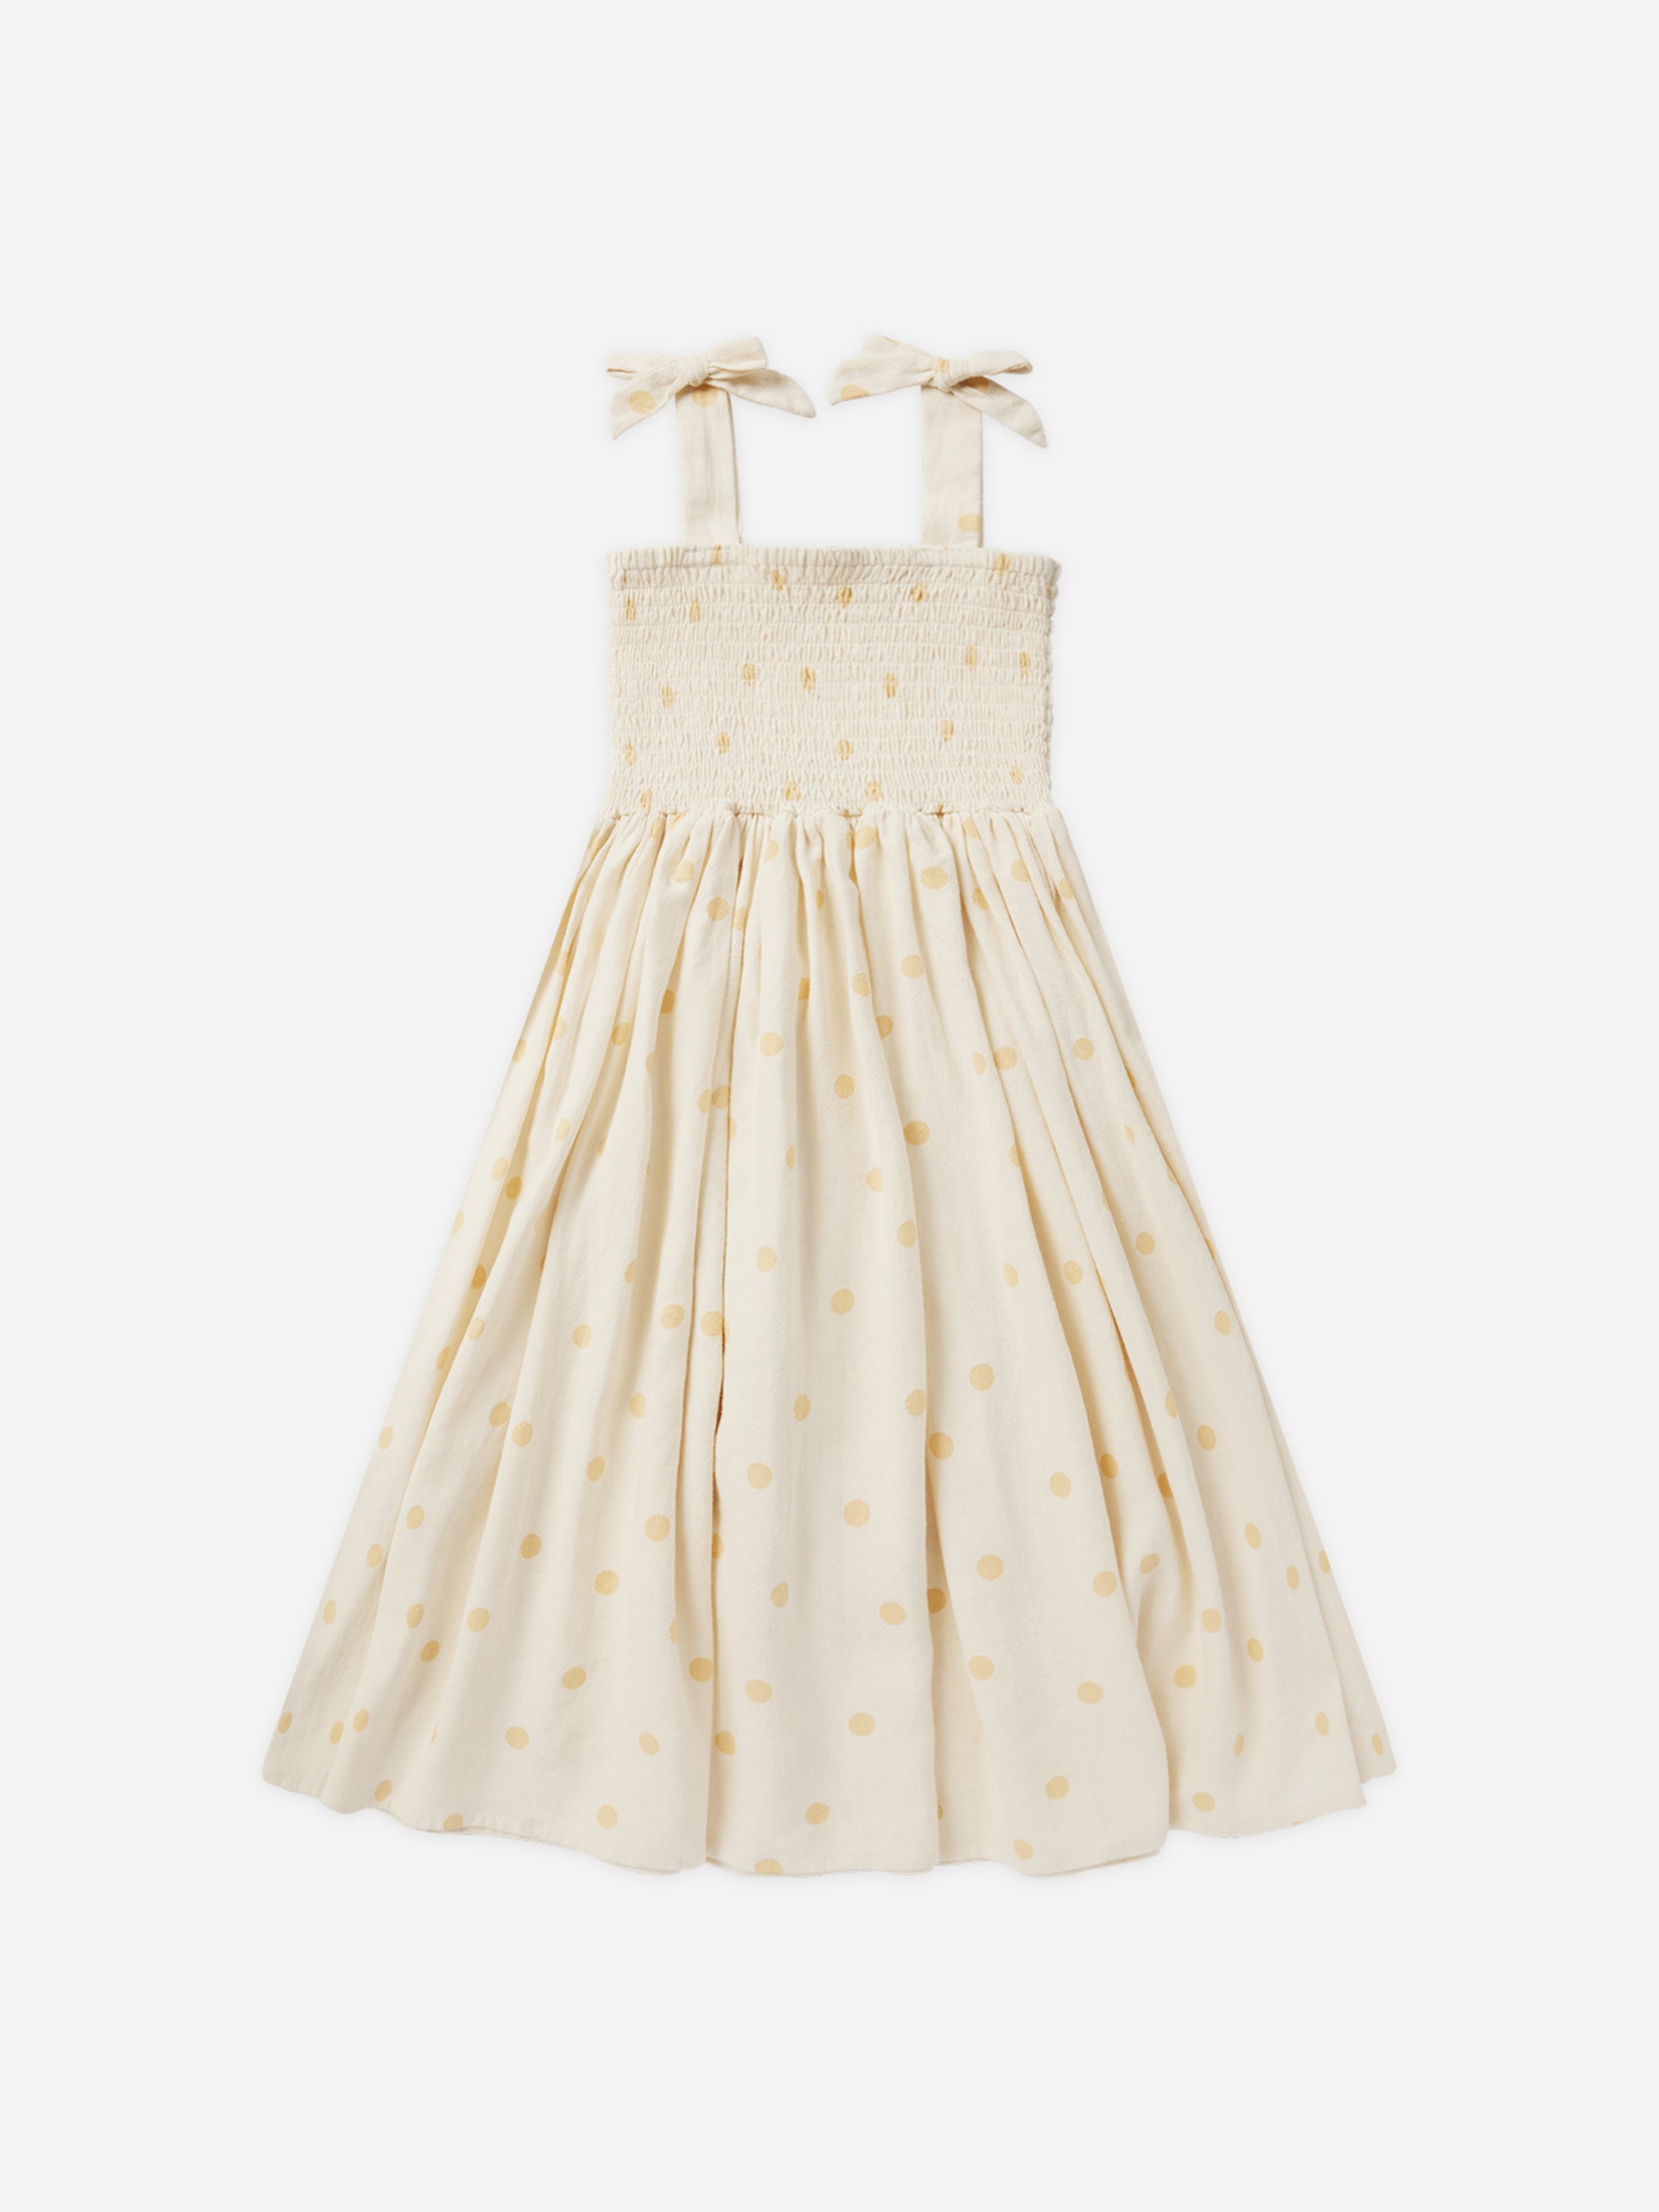 Ivy Dress || Yellow Polka Dot - Rylee + Cru | Kids Clothes | Trendy Baby Clothes | Modern Infant Outfits |